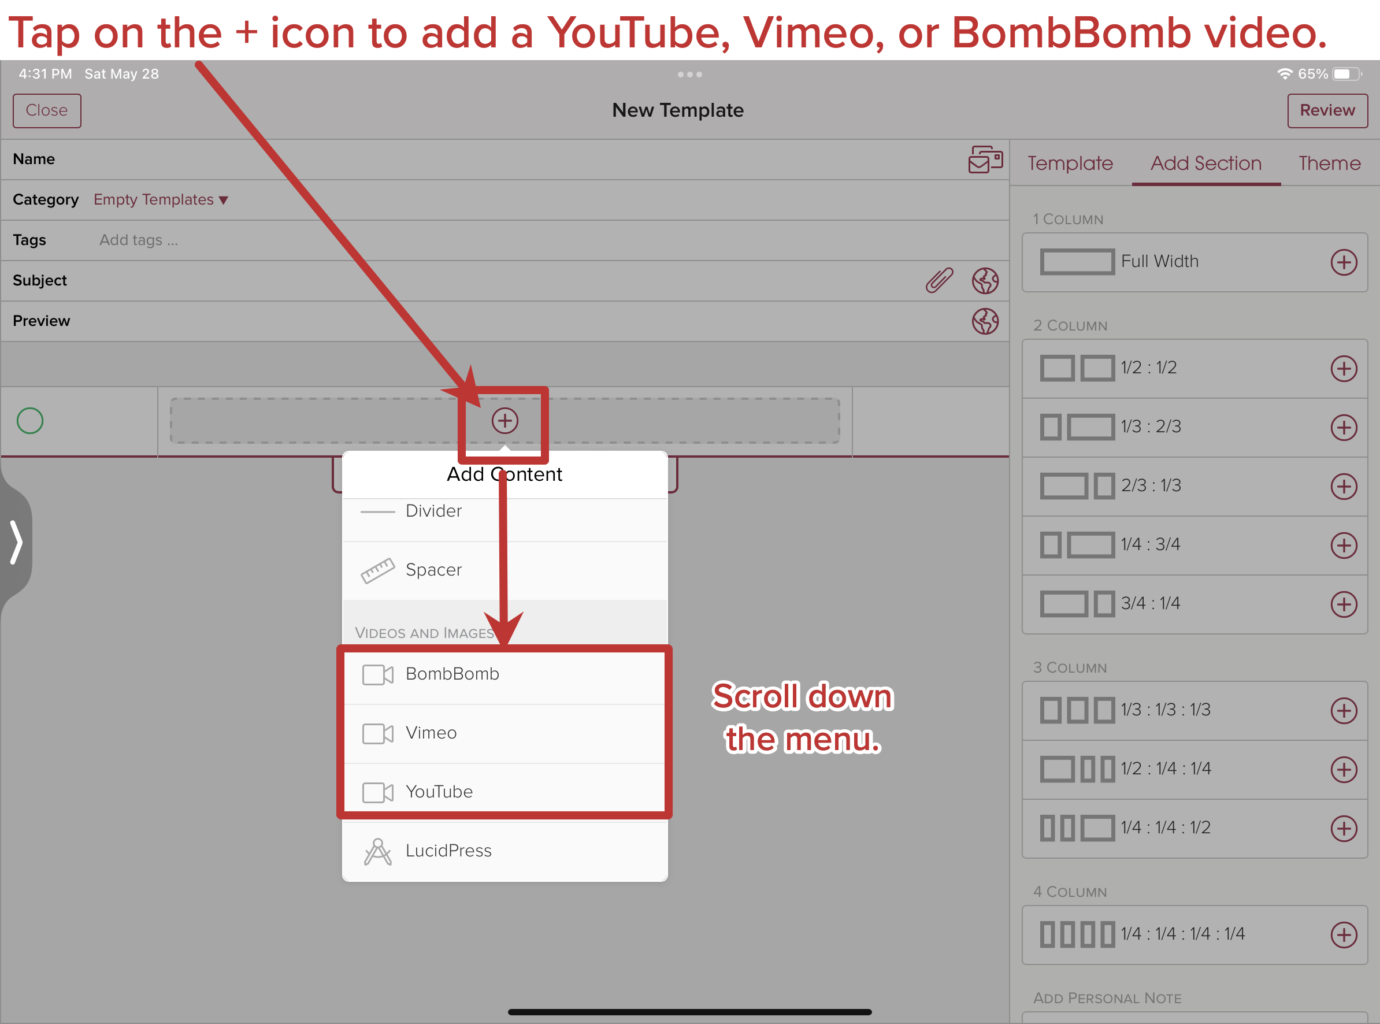 Tap on the add content + icon and then scroll down the menu and select YouTube, Vimeo, or BombBomb from the menu. In the pop-up menu paste the video-sharing link of your video.